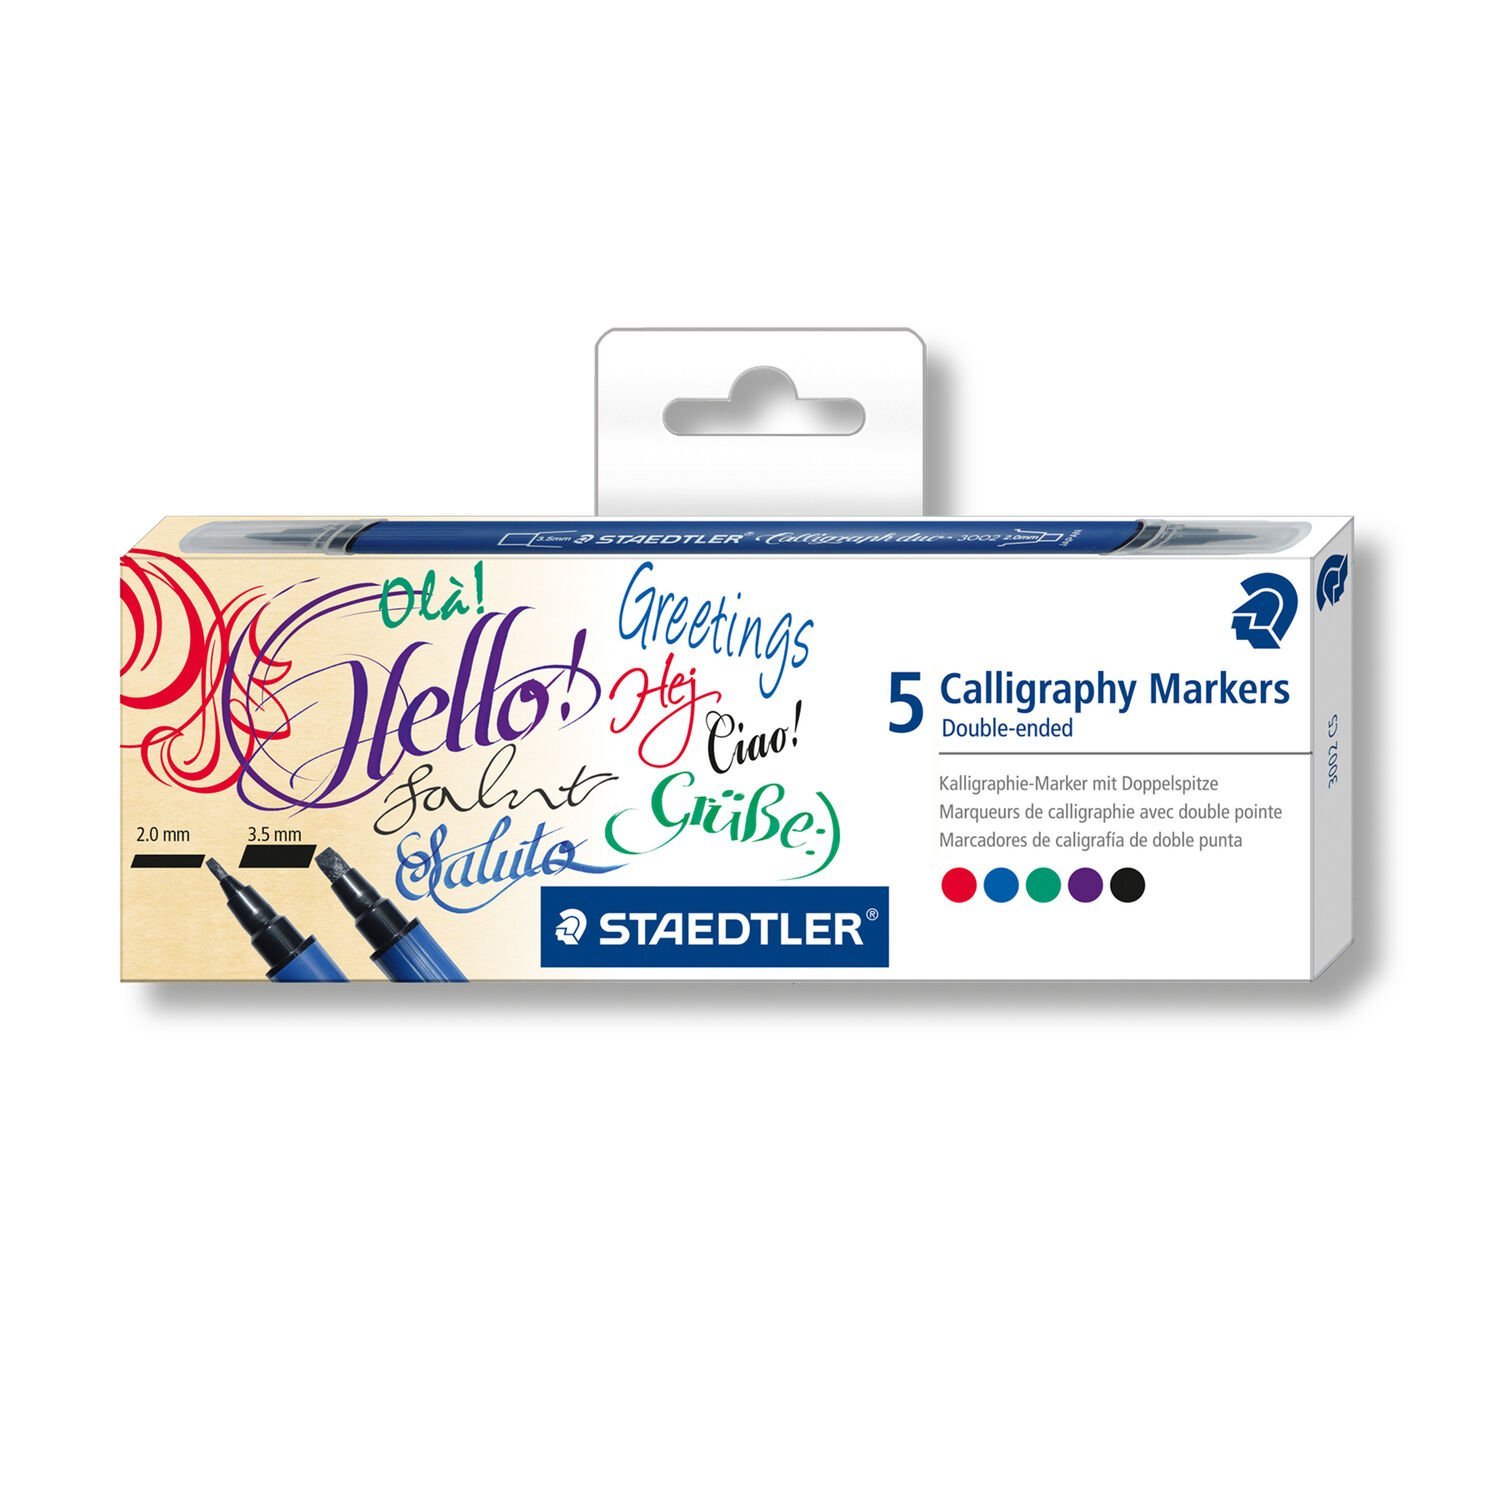 Calligraph duo 3002 - Double ended calligraphy marker